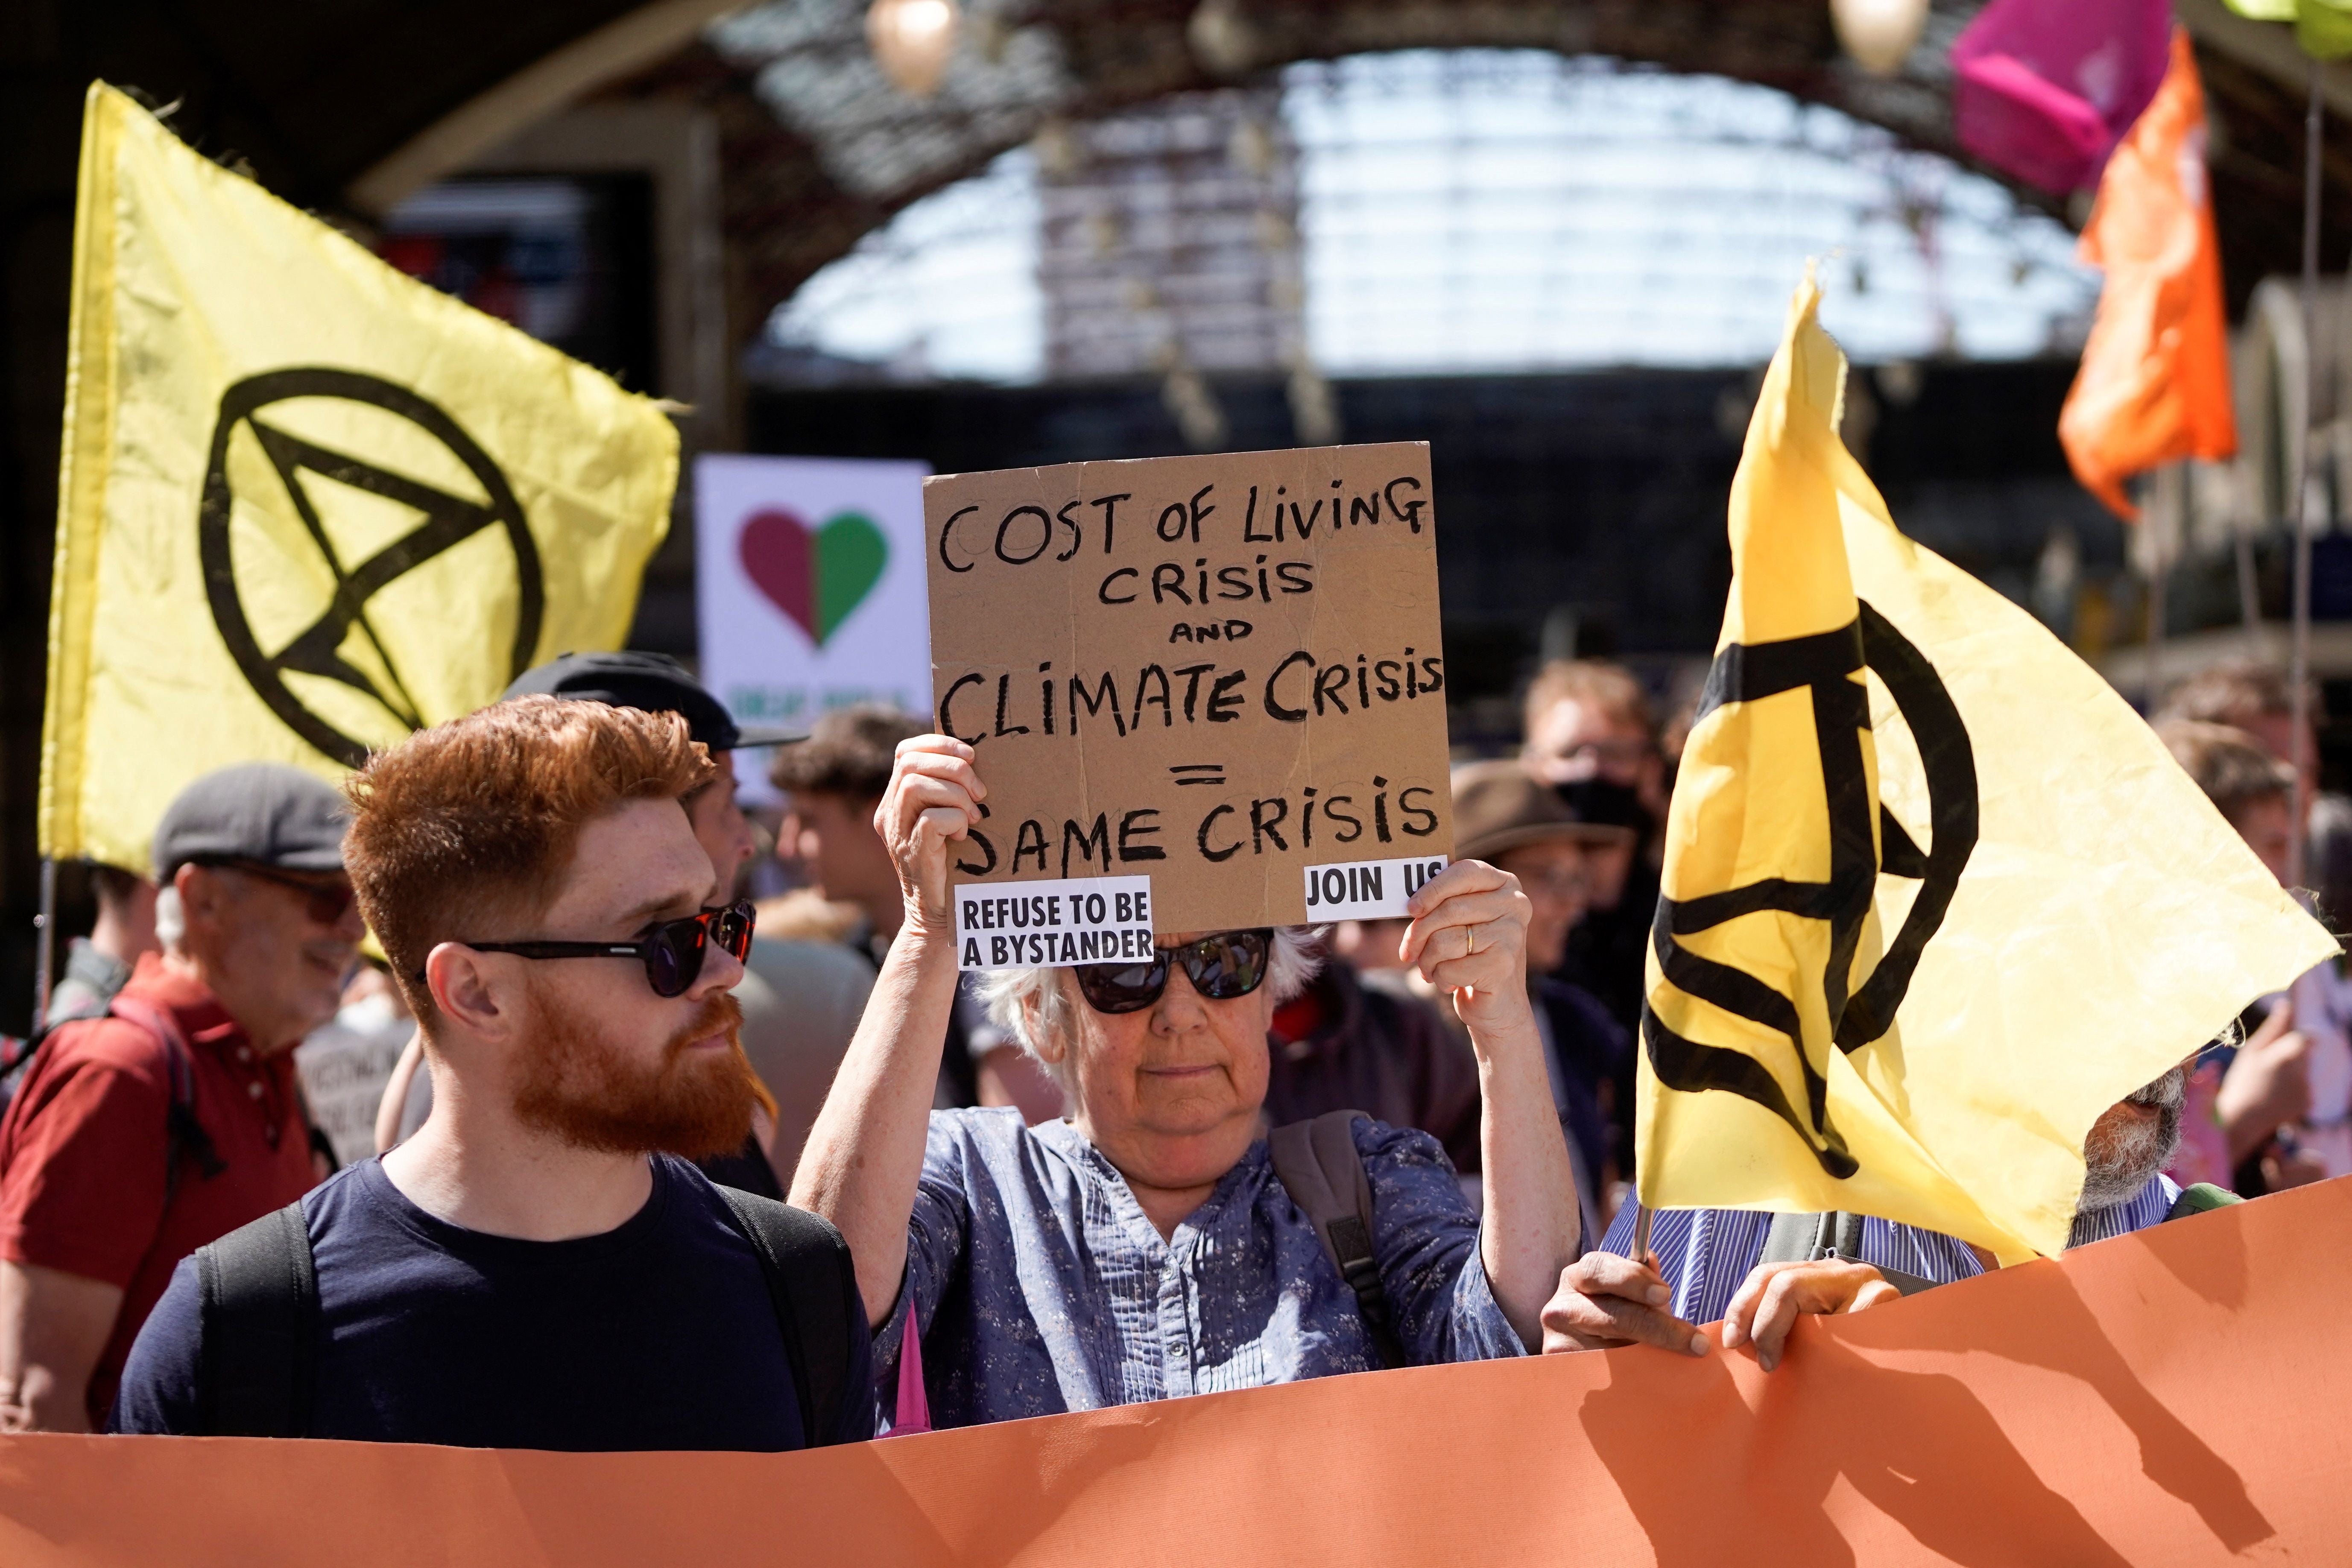 Demonstrators take part in a protest march from Victoria station to Parliament Square, in London, on July 23, 2022 to demand action over the cost of living crisis and the climate change crisis.